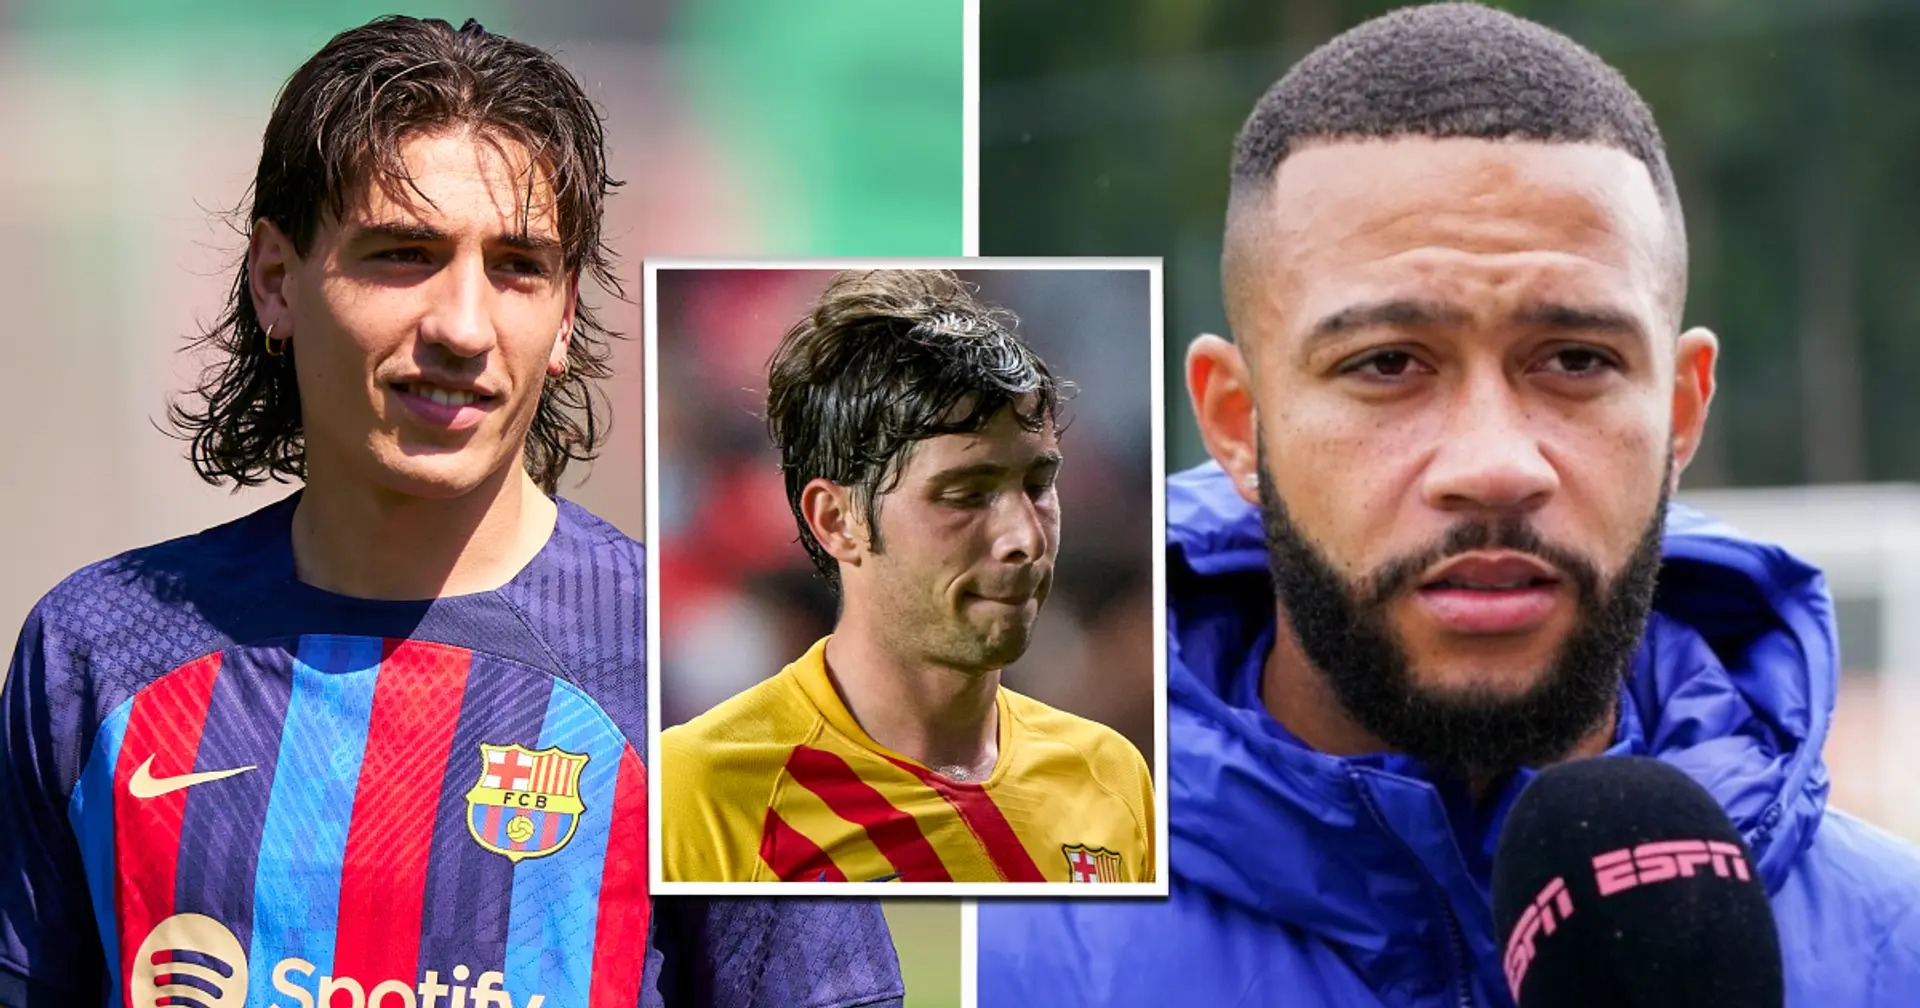 7 Barca players who could leave as free agents in 2023